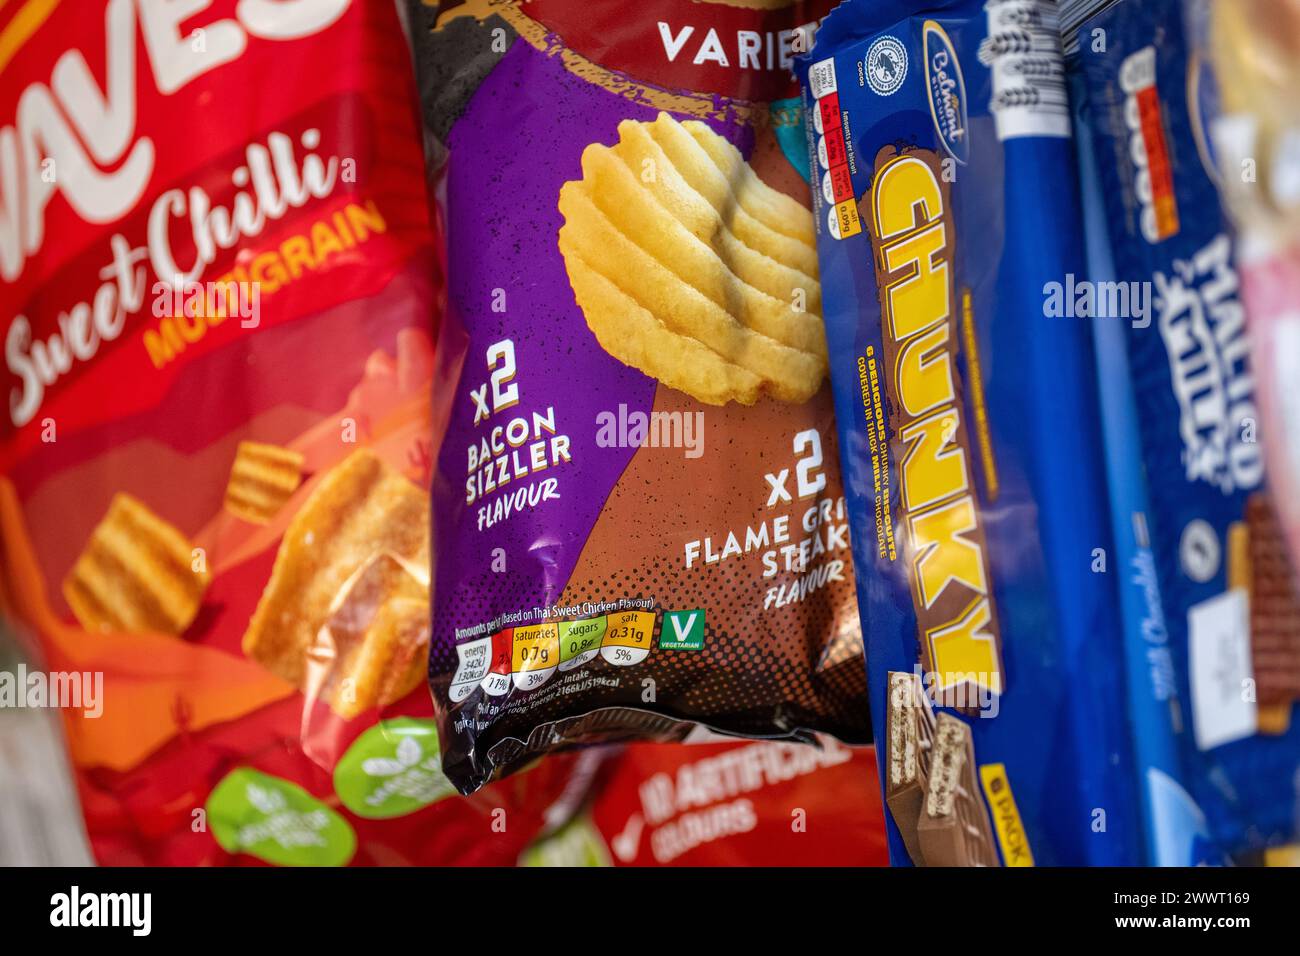 Packets of junk food in a shoppers trolley. UK Stock Photo